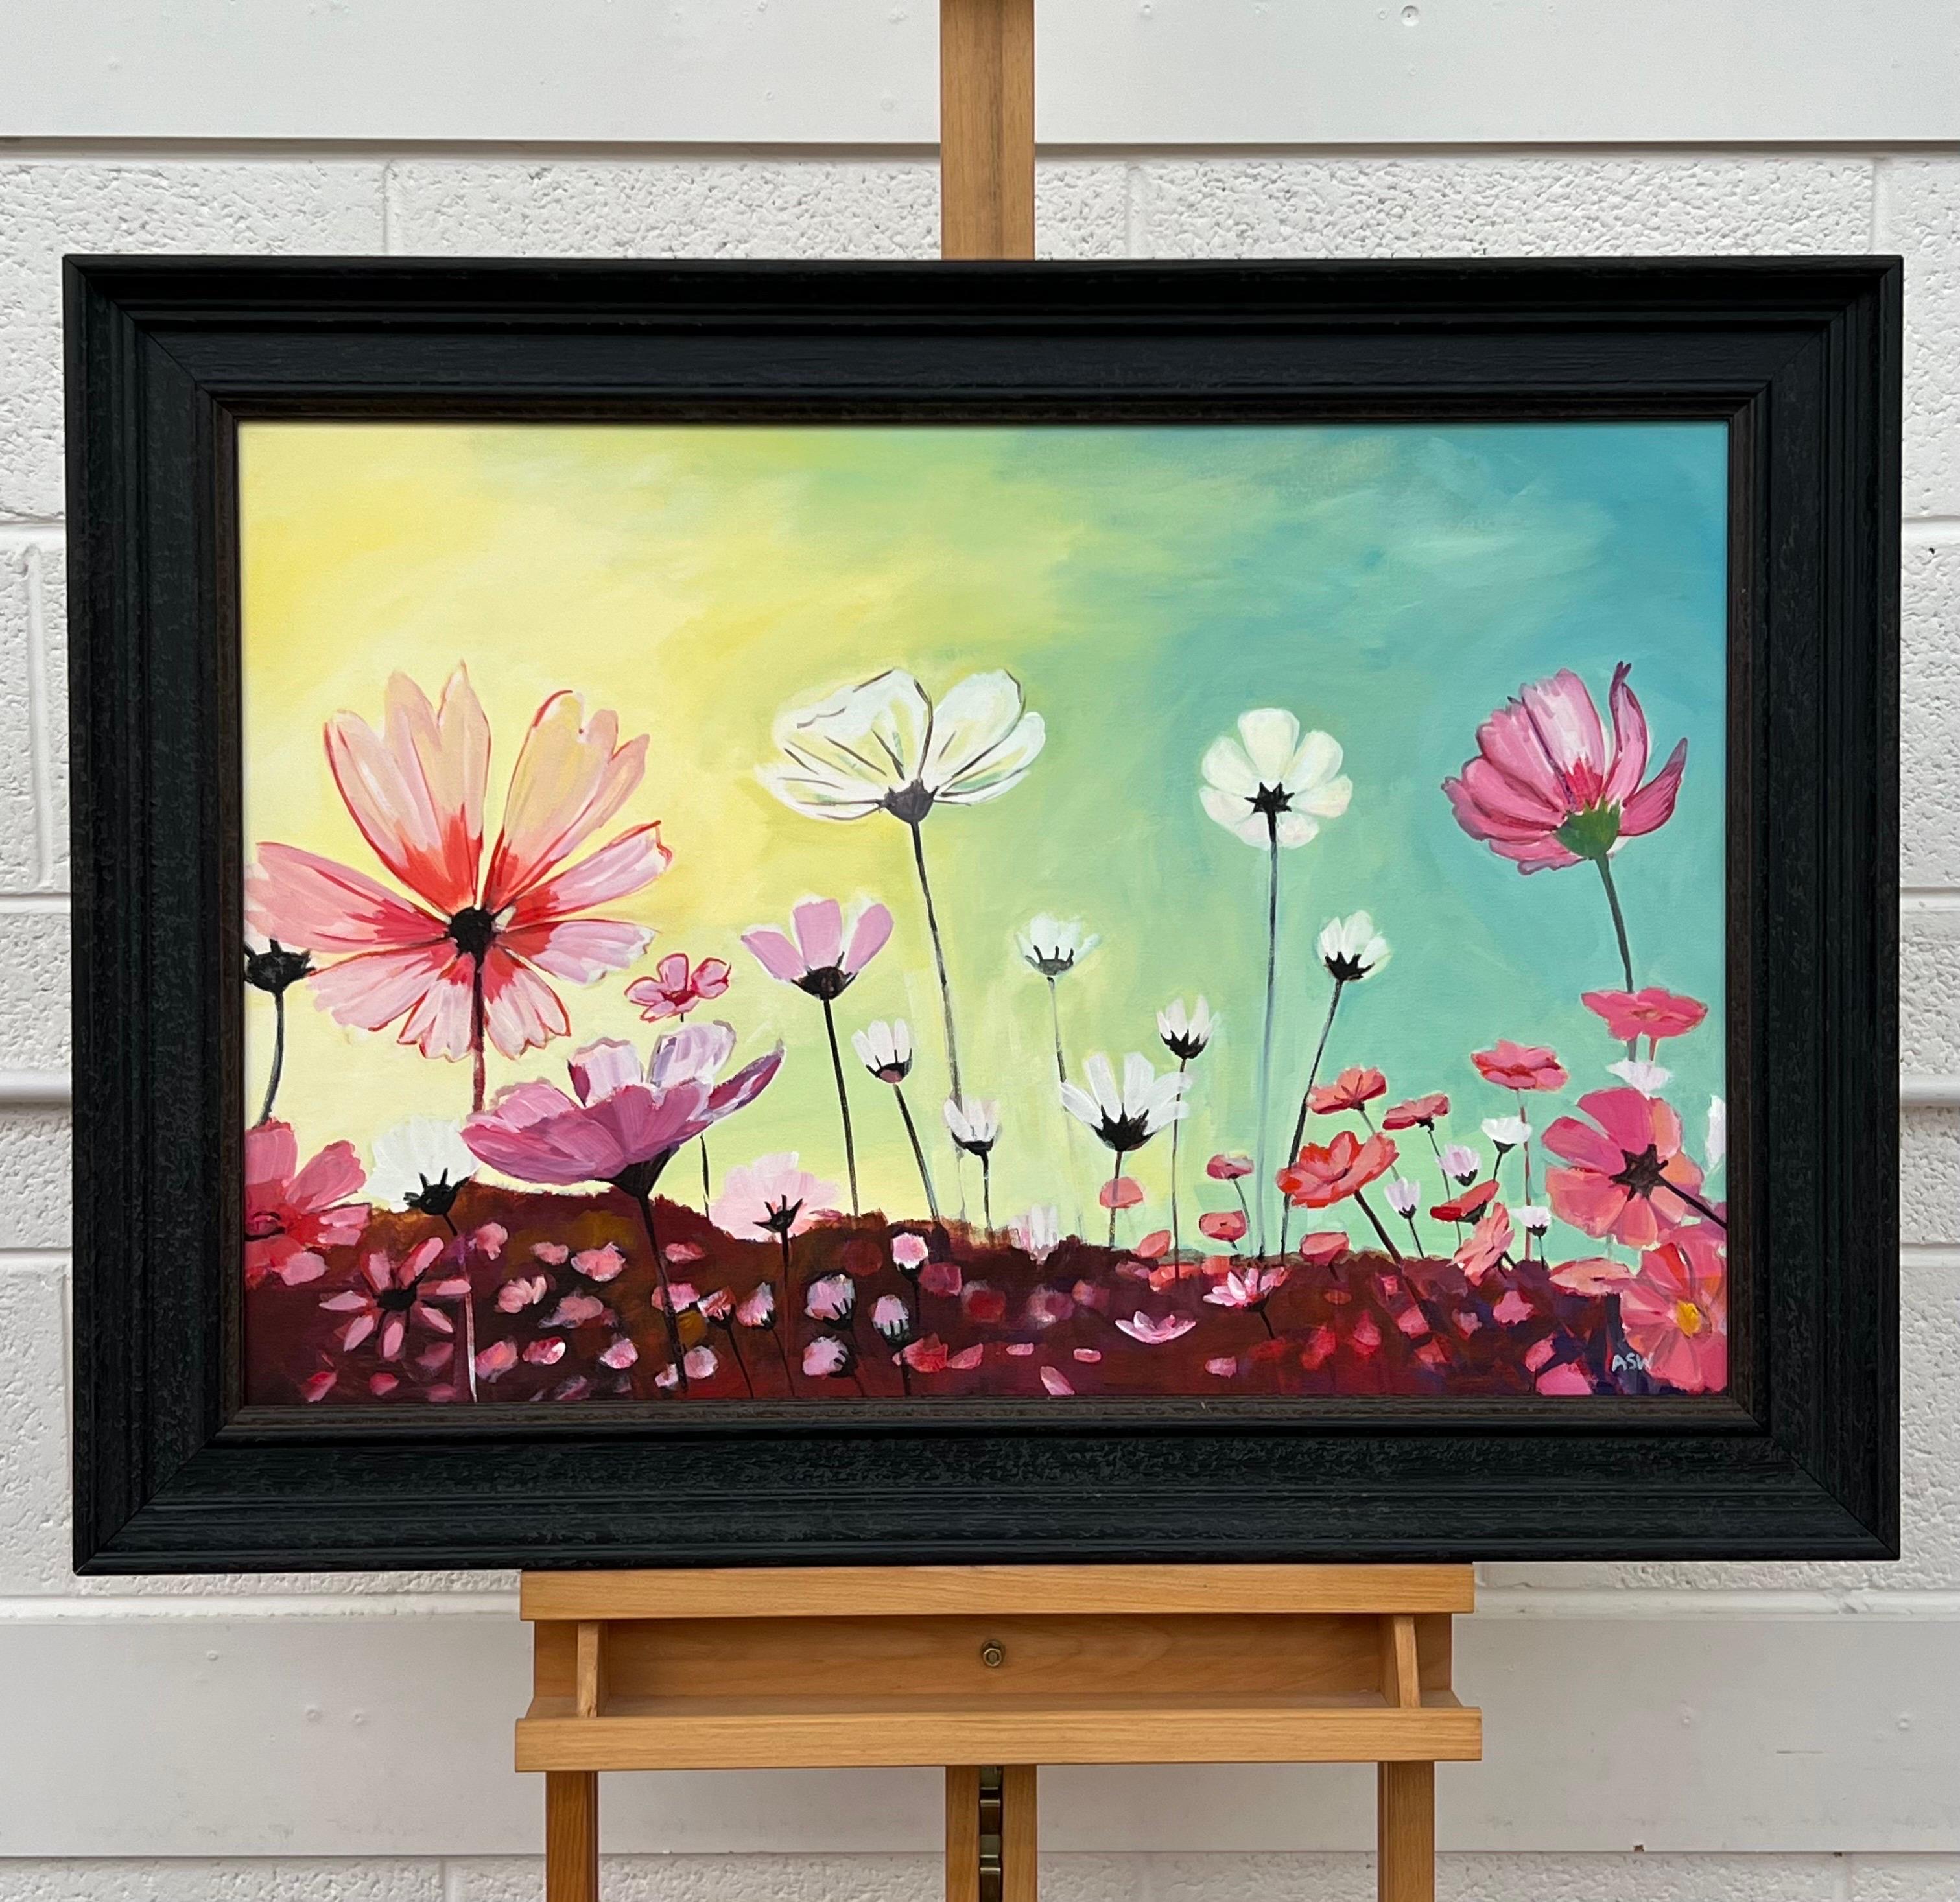 Design Study of Wild Pink & White Flowers on a Yellow & Turquoise Background - Contemporary Painting by Angela Wakefield